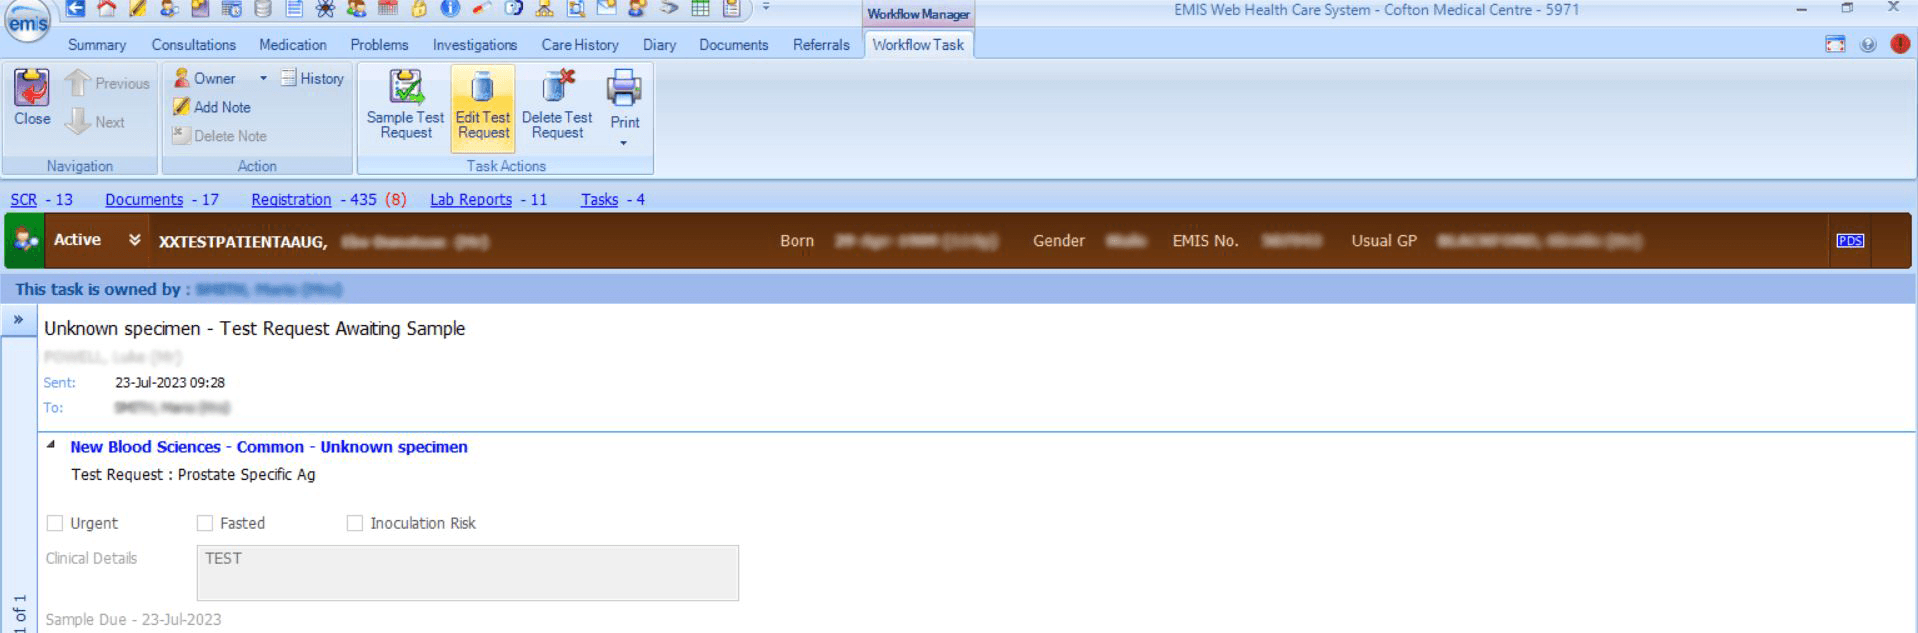 A screenshot of how to view the request list using the EMIS system